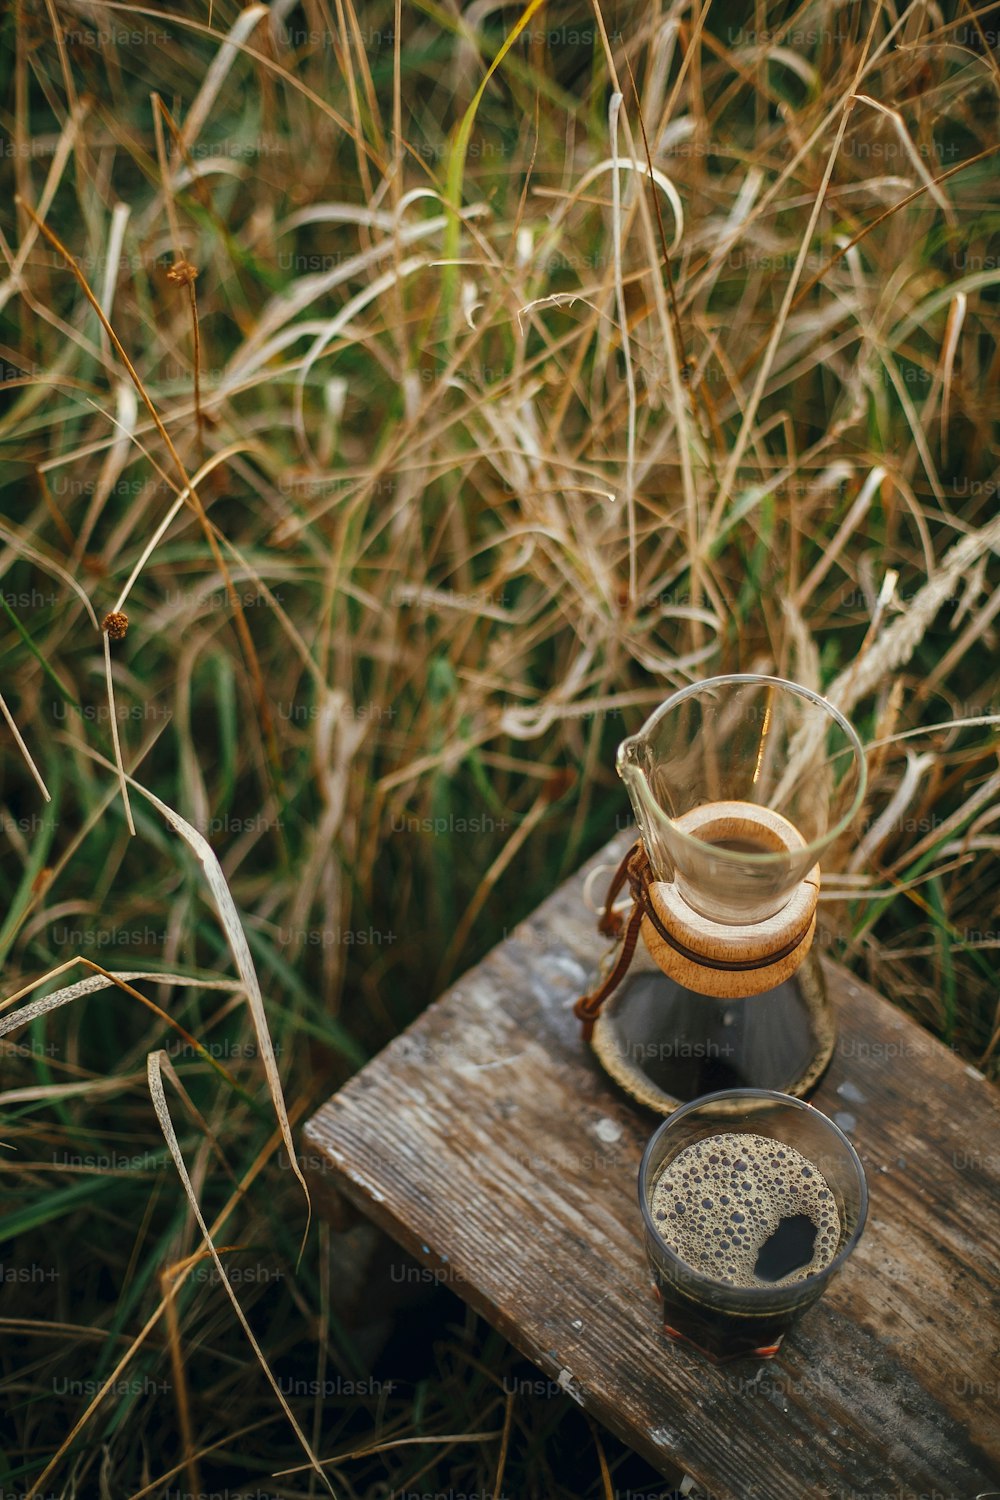 Hot coffee in glass cup and glass flask on background in sunny warm light in rural herbs. Alternative coffee brewing outdoors in travel. Atmospheric rustic tranquil moment. Vertical image